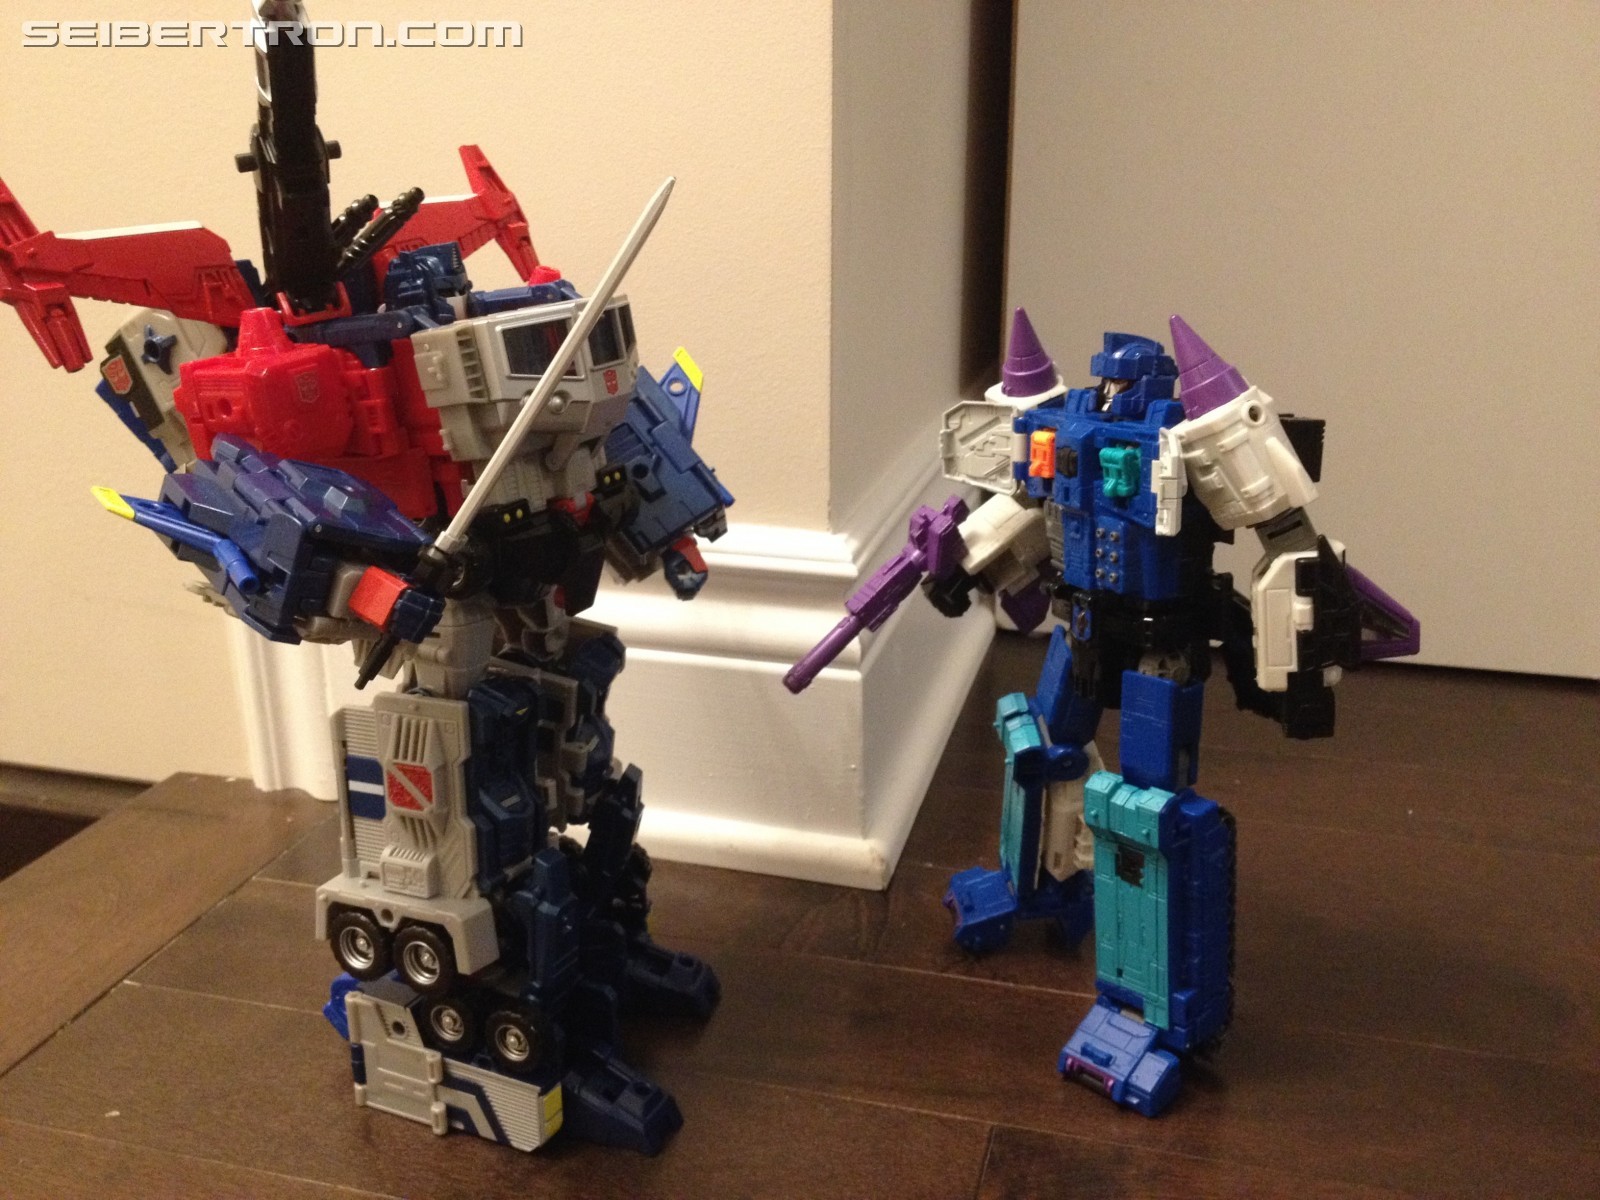 Transformers News: First Images of Hasbro Transformers Titans ReturnMagnus Prime Combined with Takara Legends Godbomber